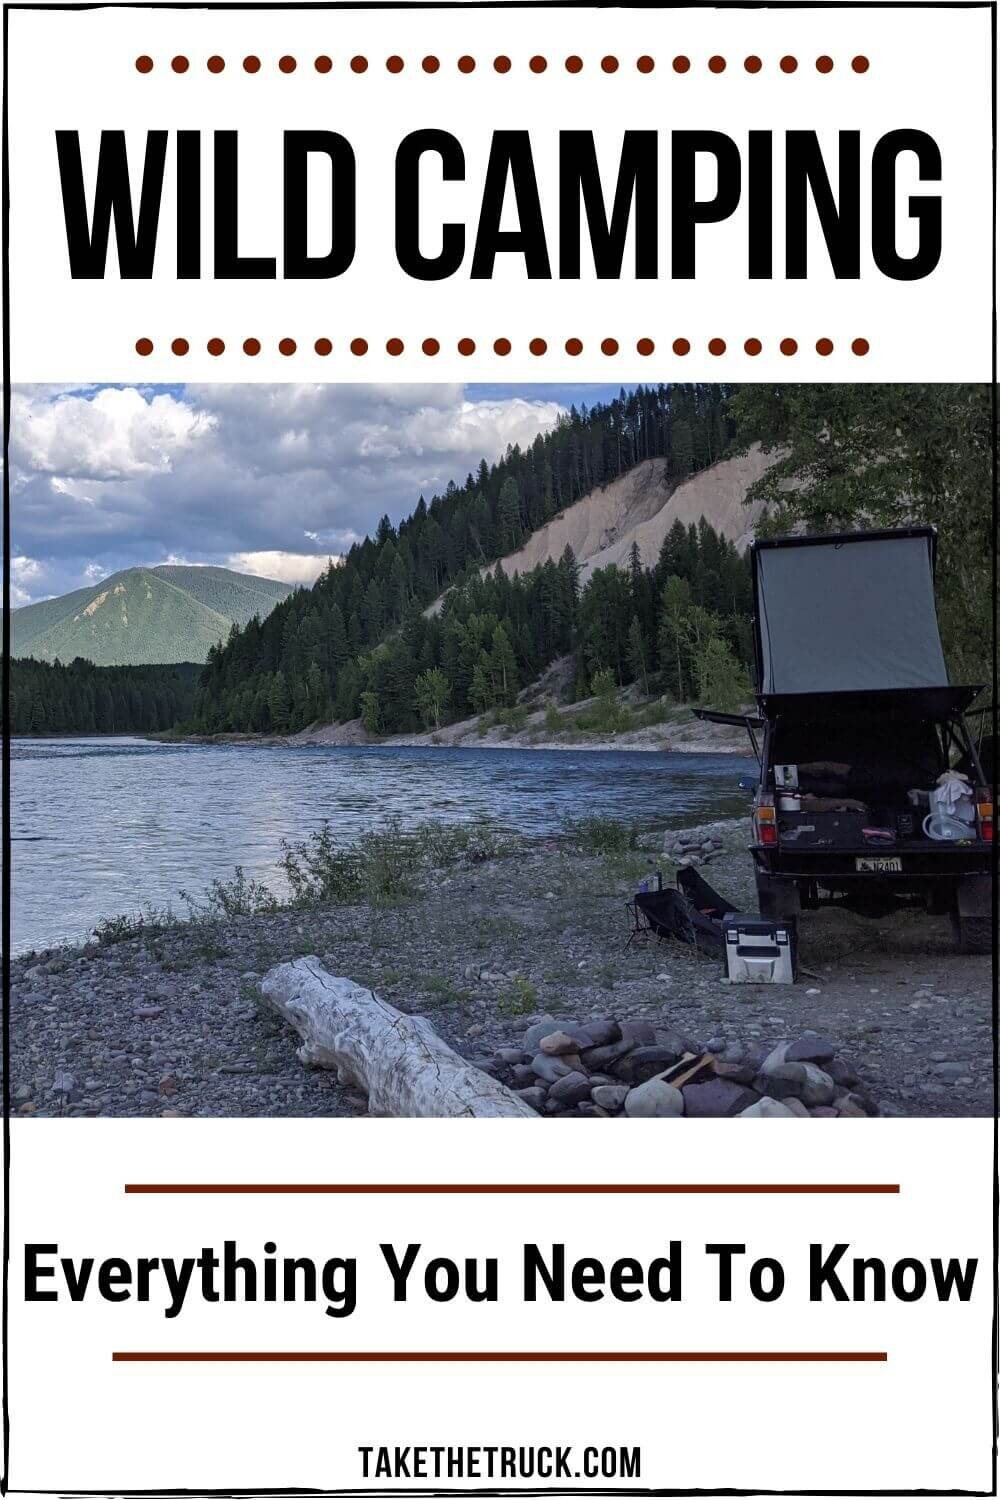 If you’ve never gone primitive camping off grid and don’t think you know how, check out this post! It’s full of boondocking and wild camping tips, ideas, and gear to make wild camping comfortable.